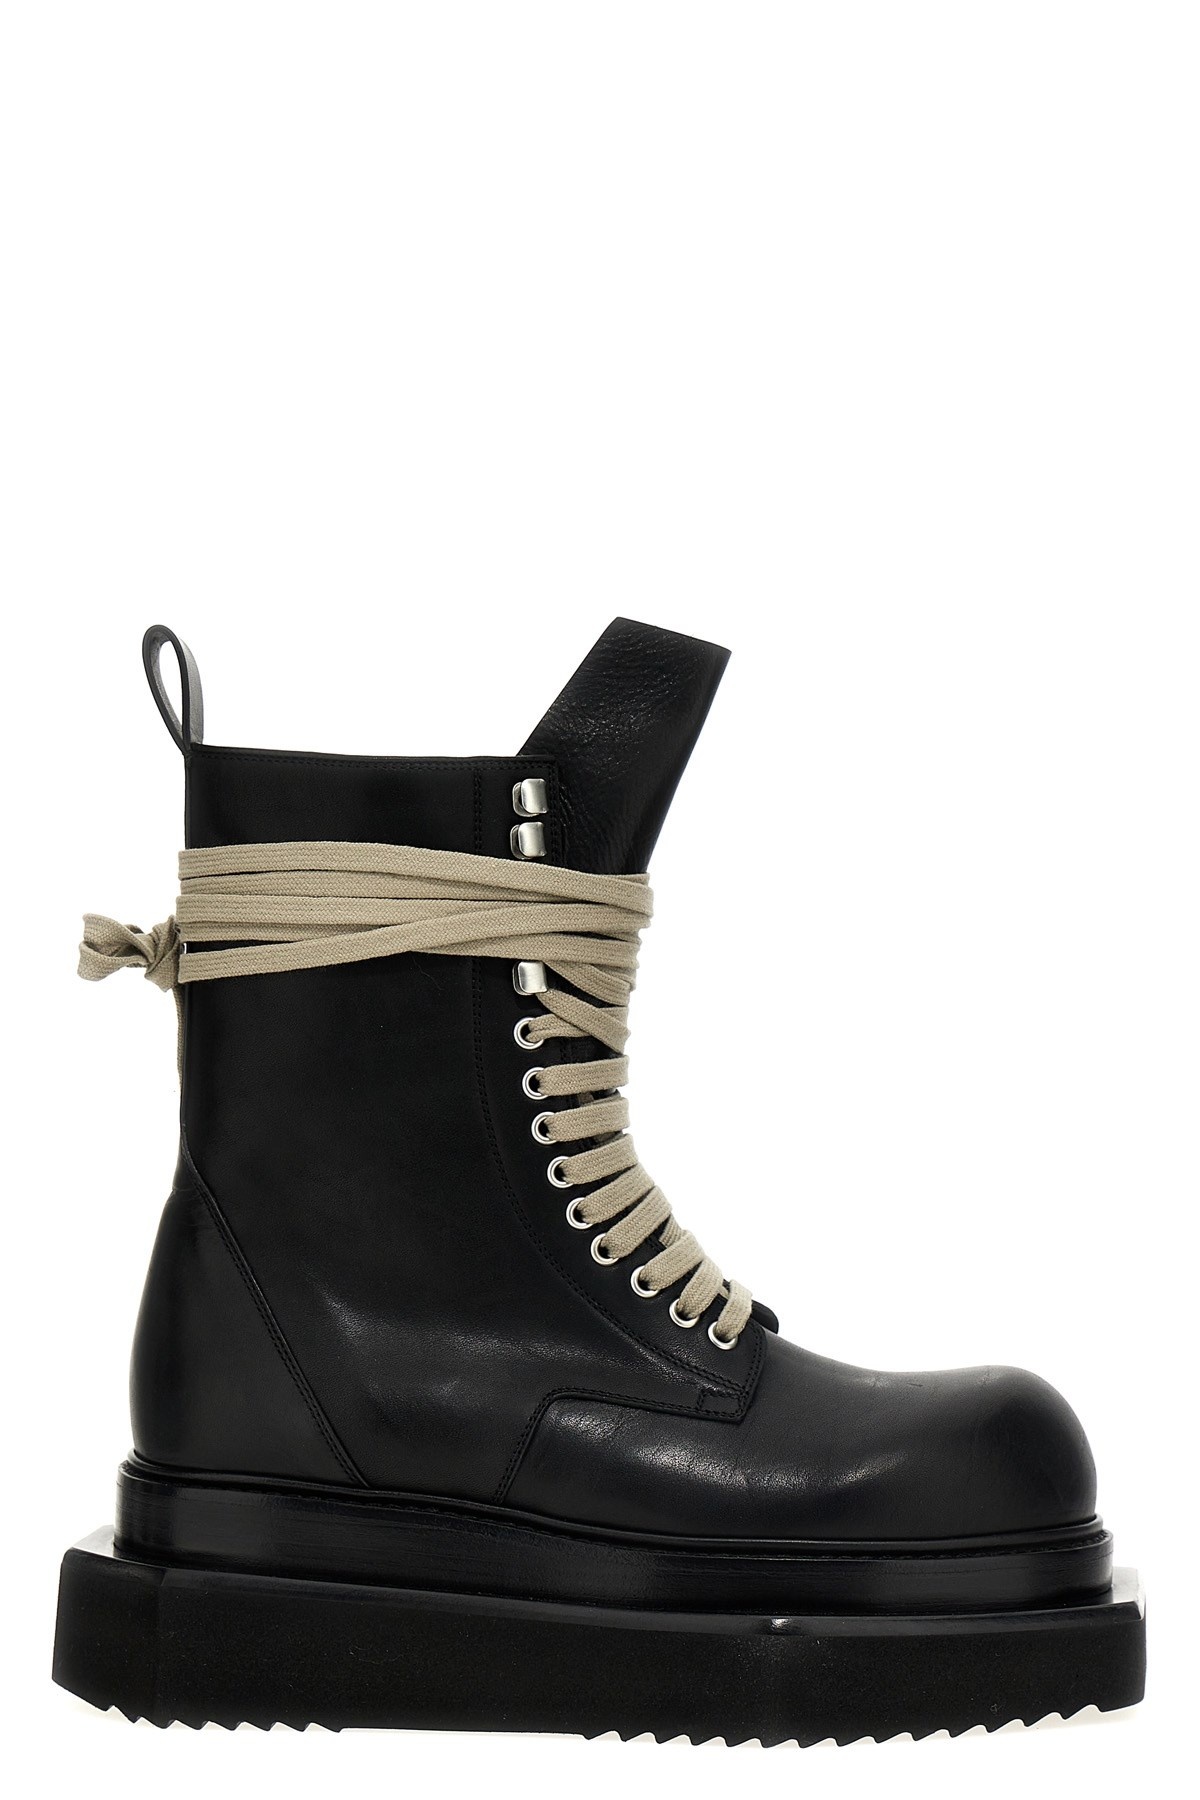 'Laceup Turbo Cyclops' boots - 1